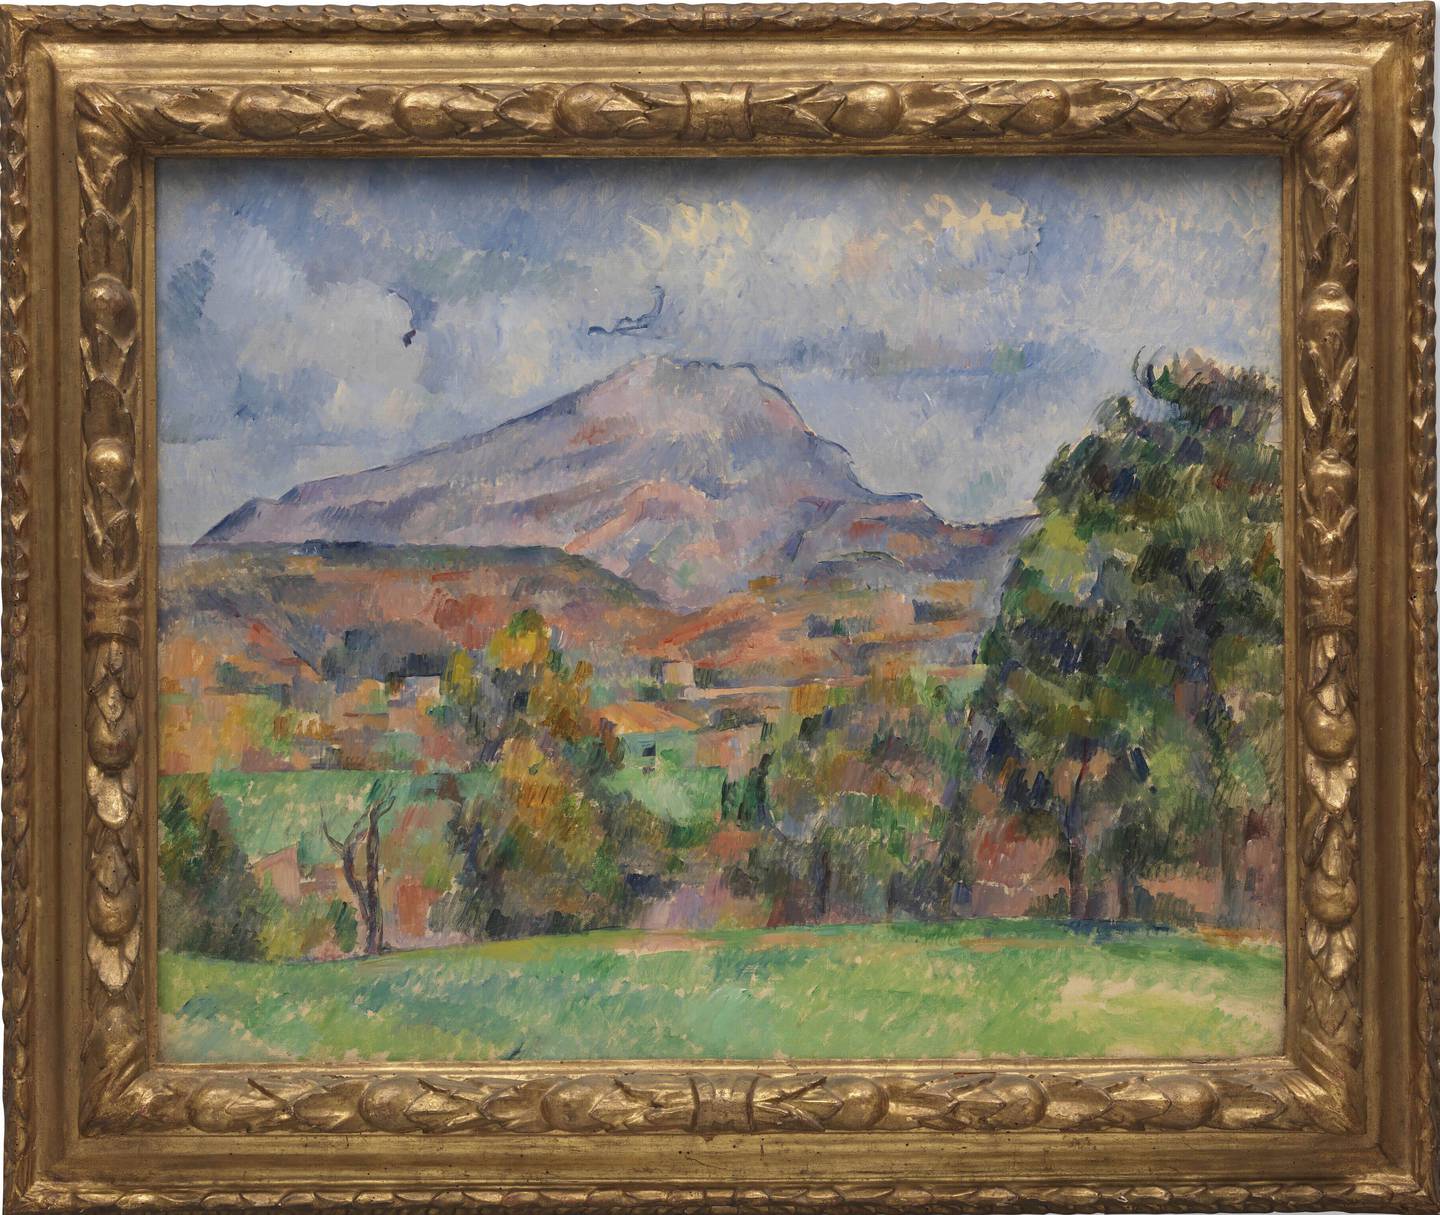 La Montagne Sainte-Victoire by Paul Cezanne, an oil on canvas from the Paul G Allen Collection. The painting was one of 60 pieces auctioned by Christie's in New York, bringing $1.5 billion in a single night. AP